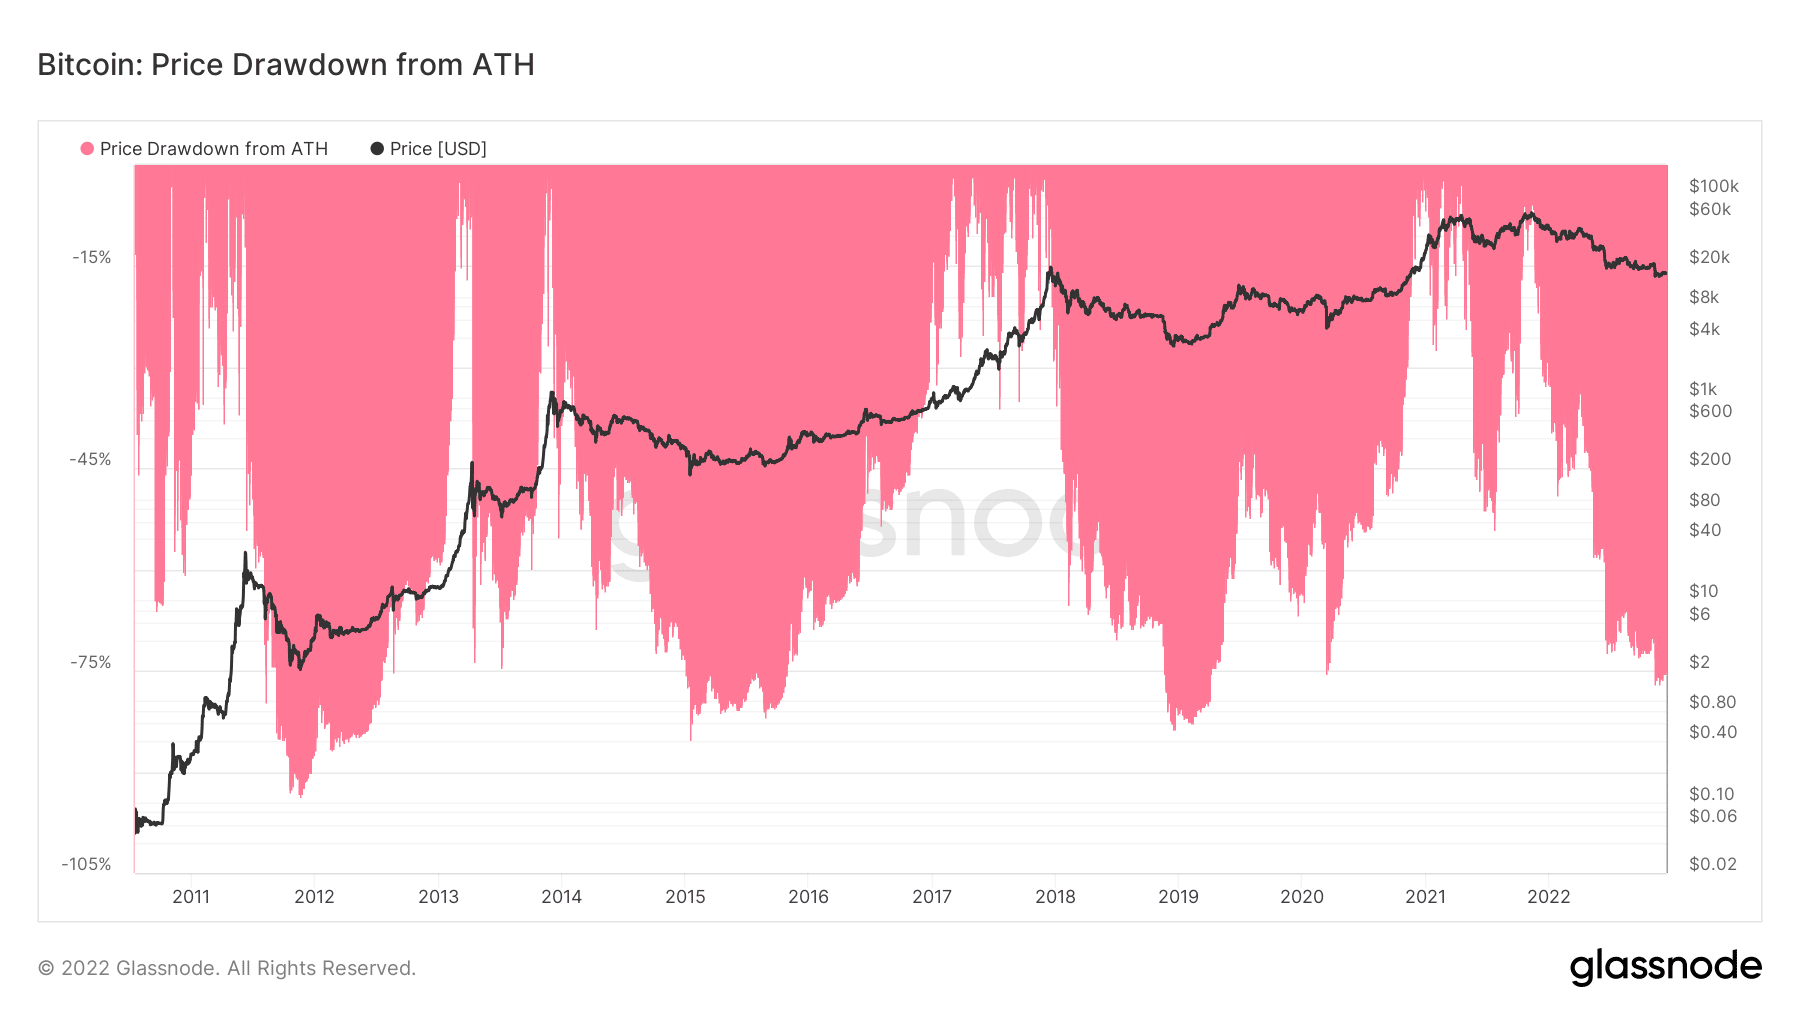 Bitcoin price down from all-time high